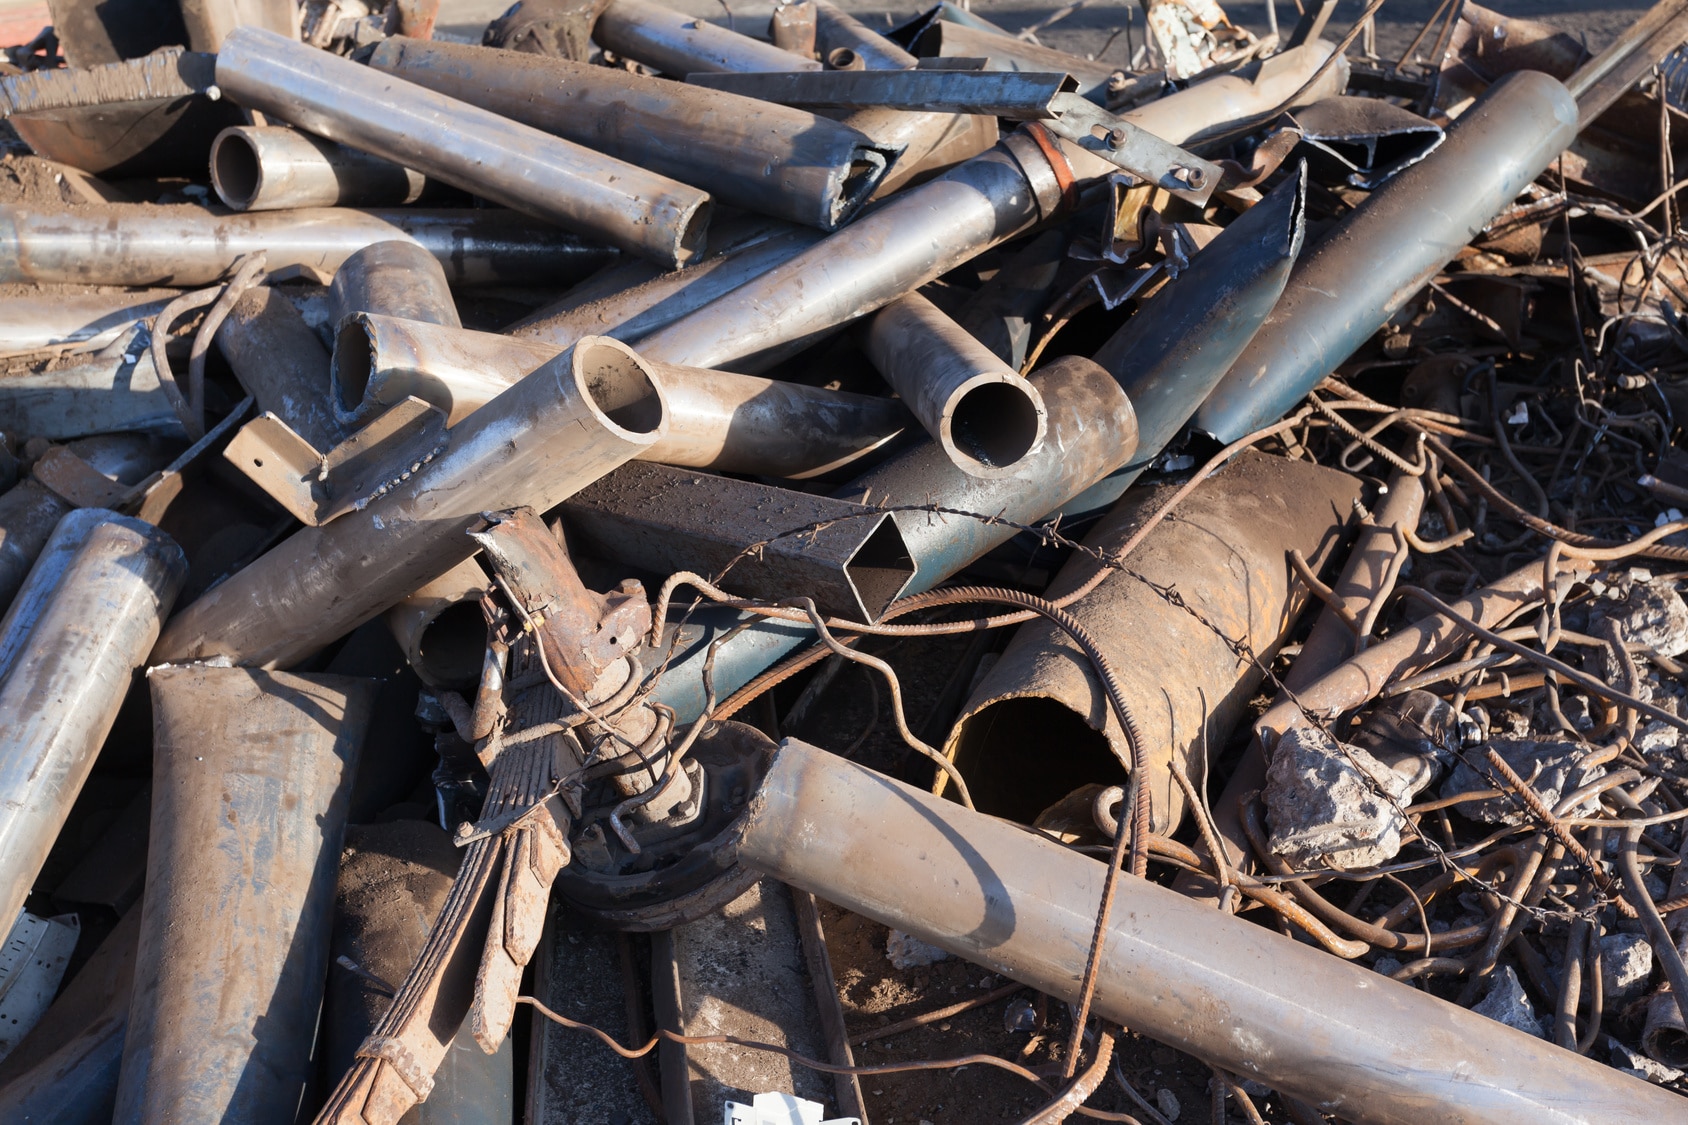 Scrap Metal and if you are looking for help with metal scrap recycling contact a great company in Burnham.